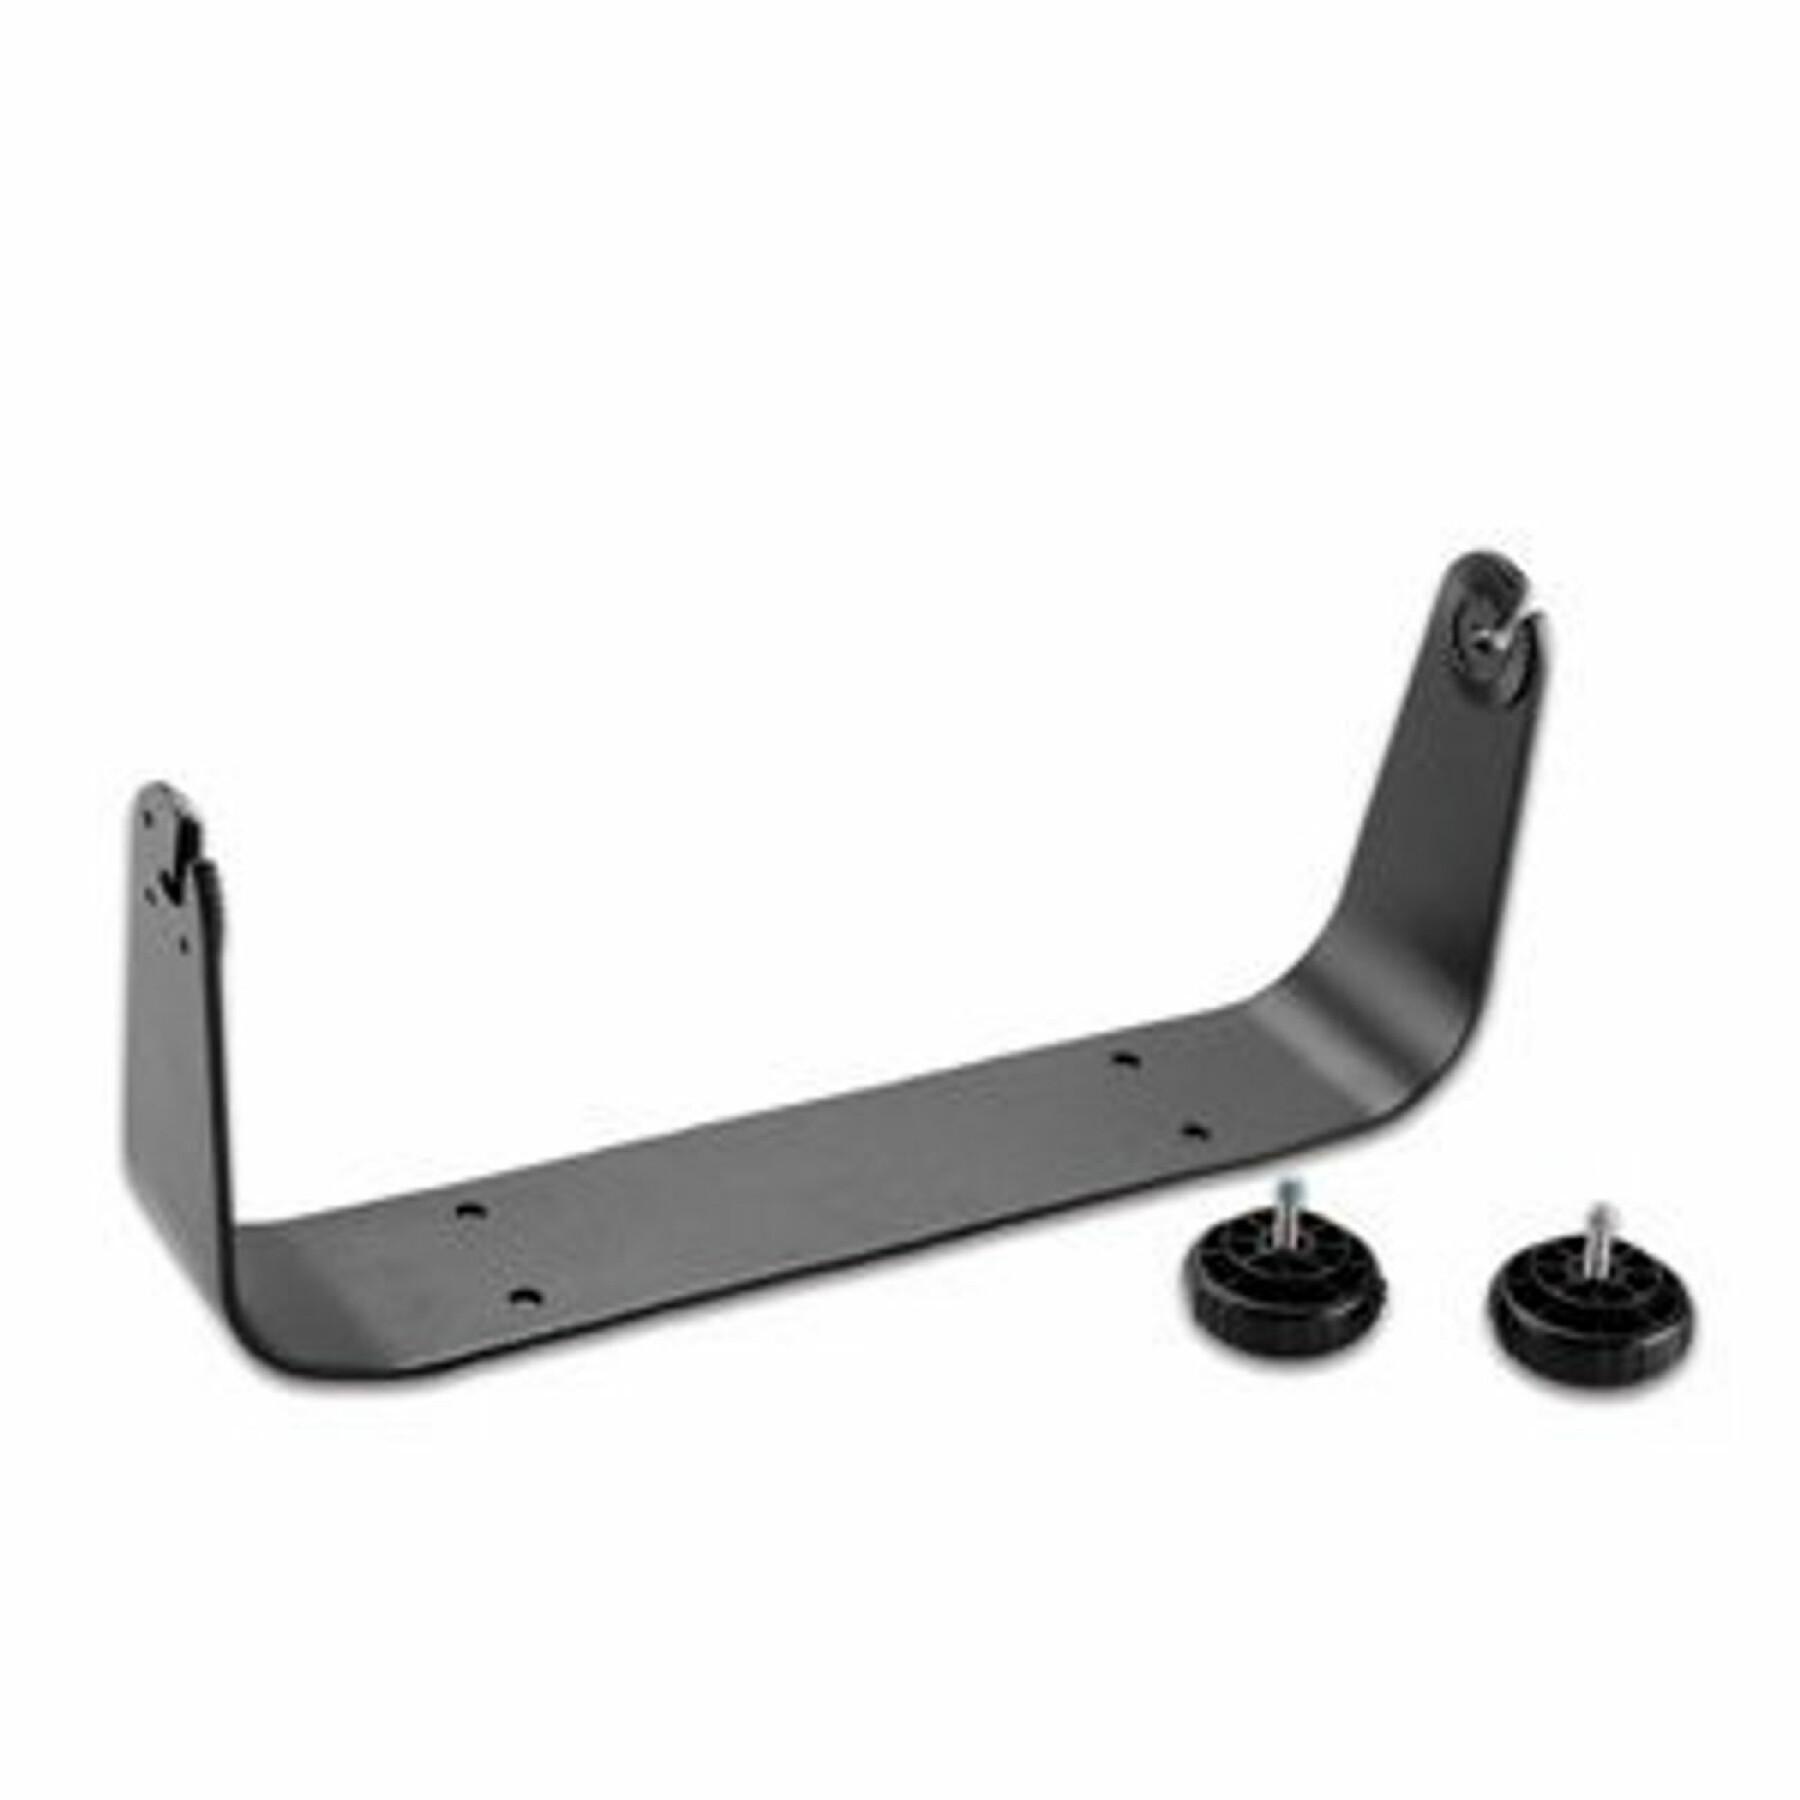 Support Garmin bail mount with knobs gpsmap 1000 series